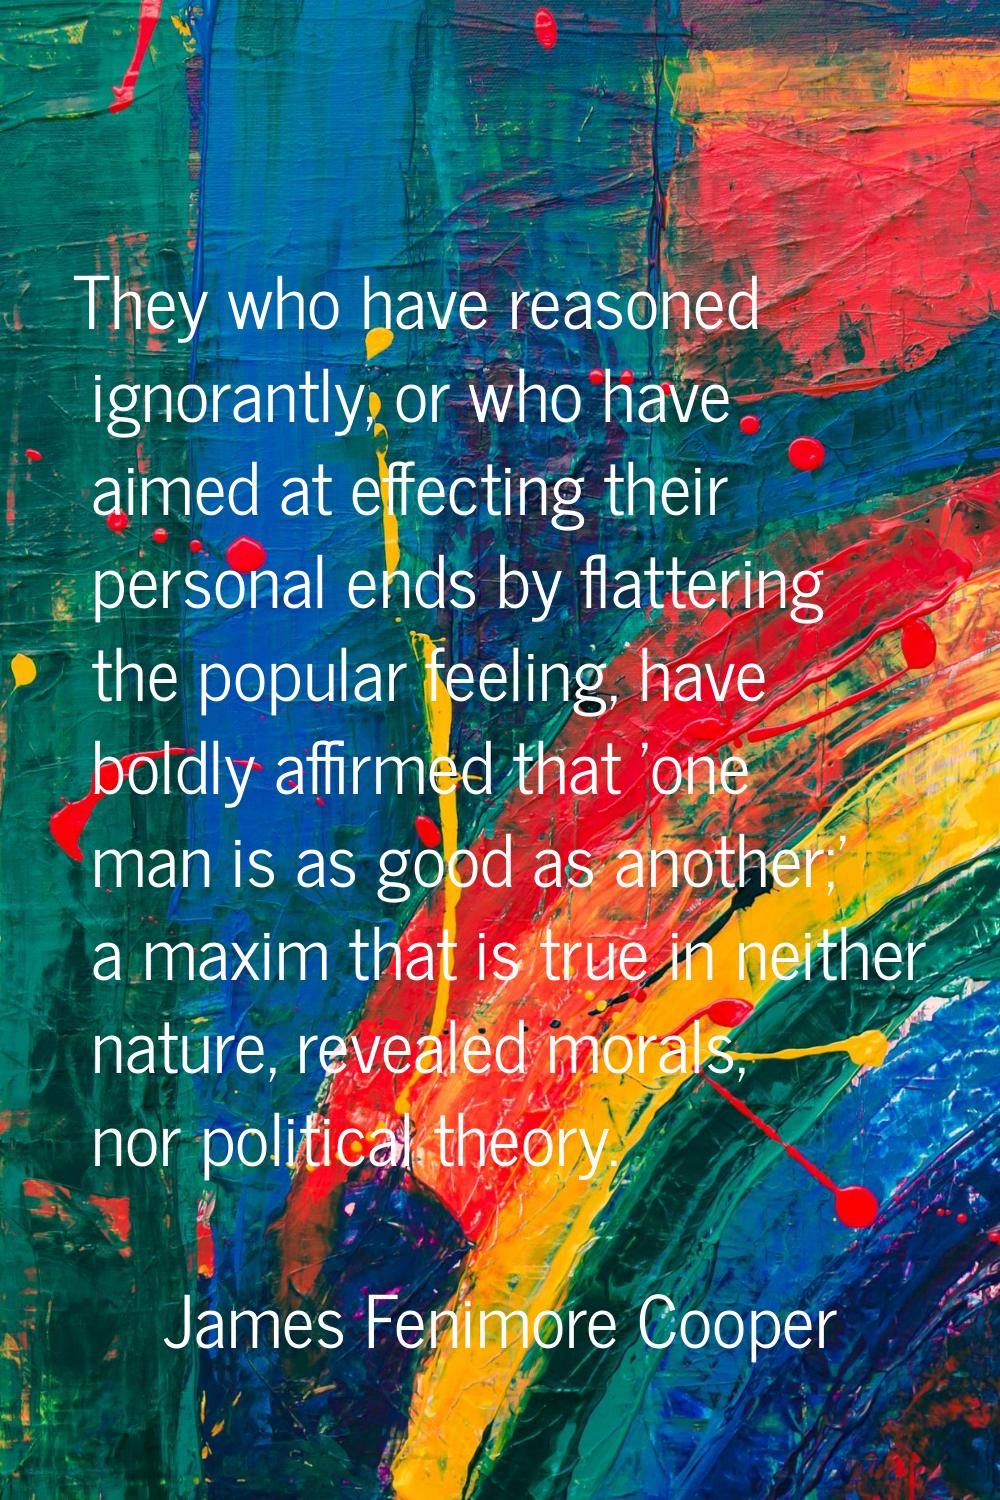 They who have reasoned ignorantly, or who have aimed at effecting their personal ends by flattering